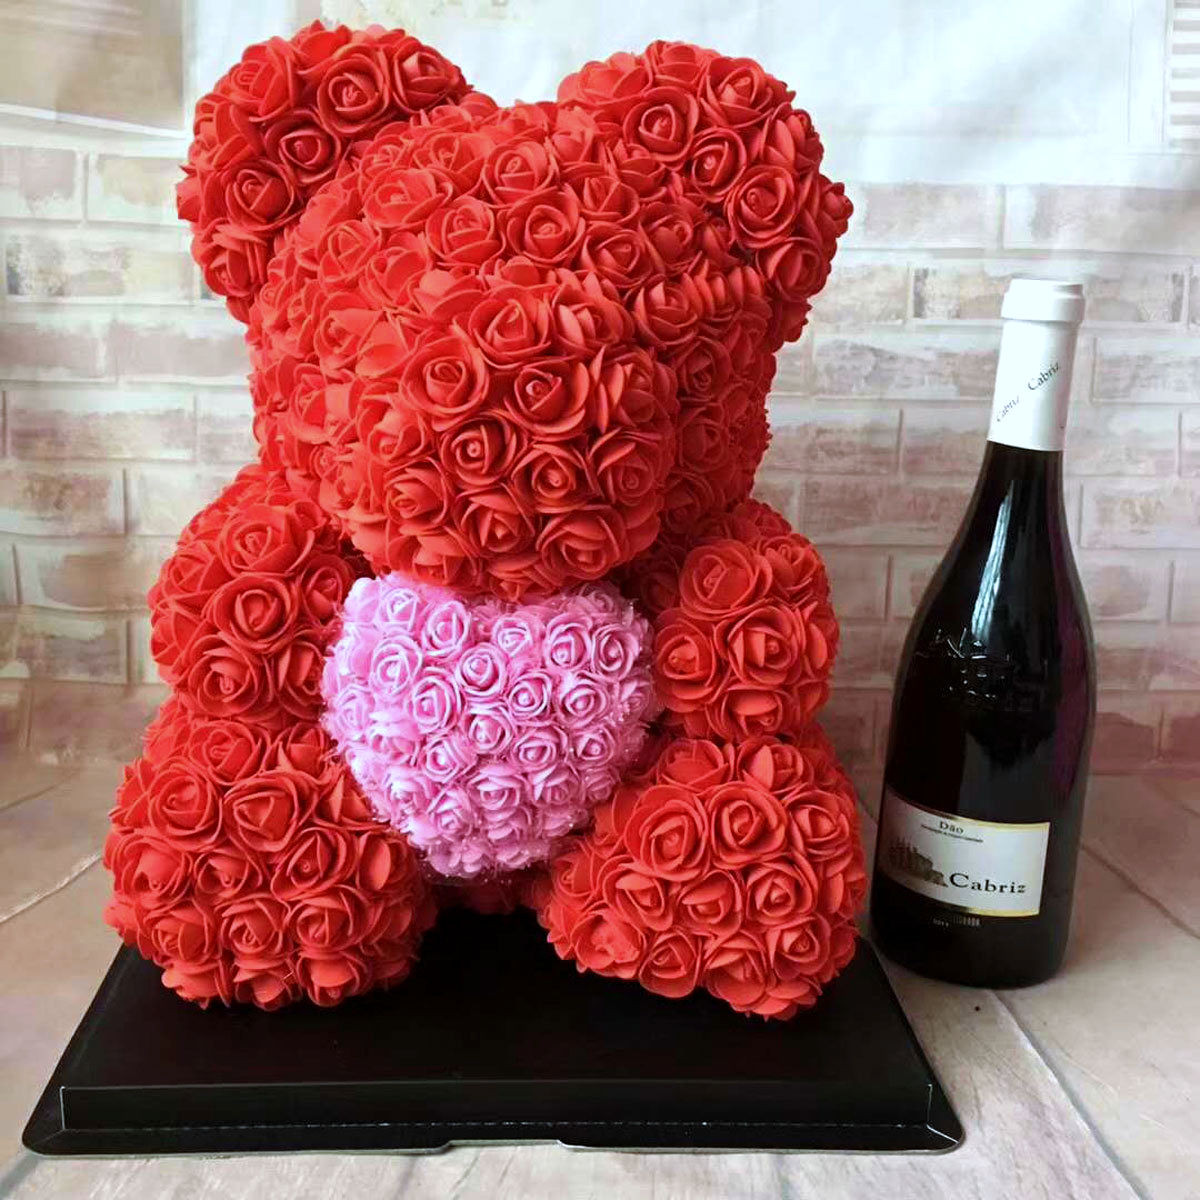 Ideas For Valentines Day Gift
 9 Wine Valentines Day Gift Ideas for Her